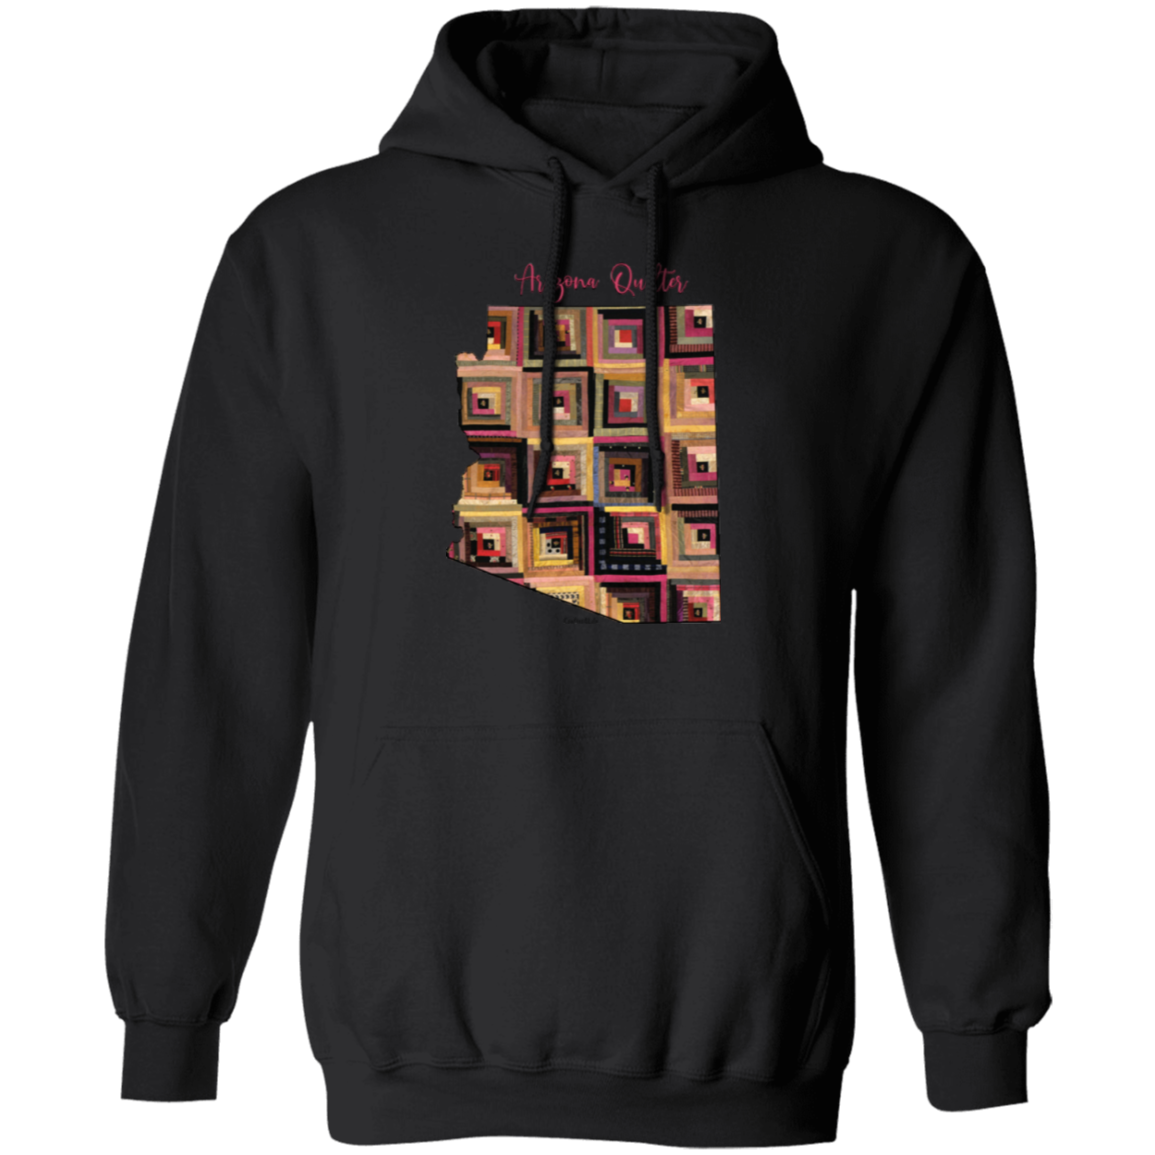 Arizona Quilter Pullover Hoodie, Gift for Quilting Friends and Family